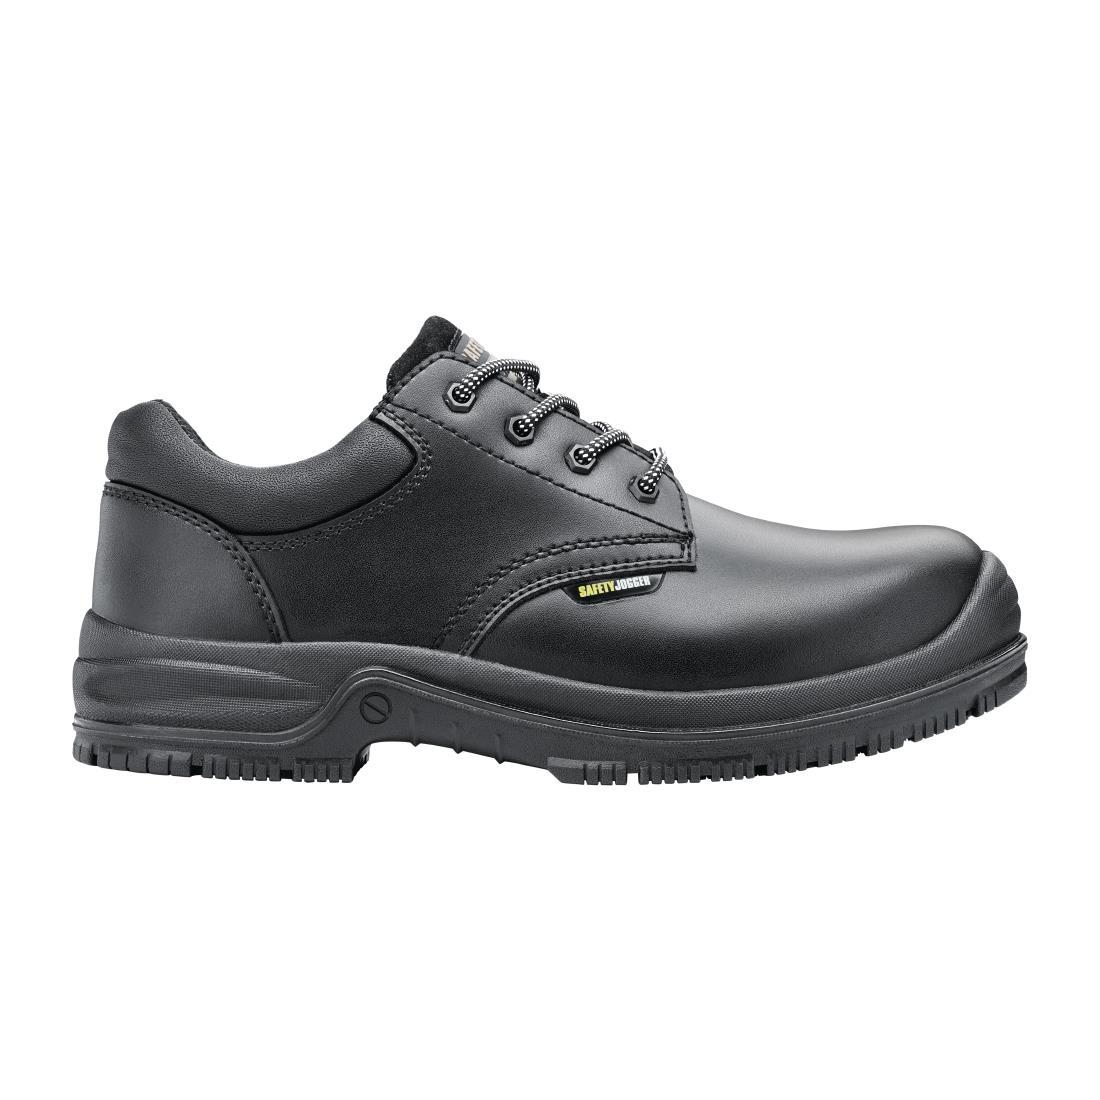 Shoes for Crews X111081 Safety Shoe Black Size 38 - BB596-38  - 1